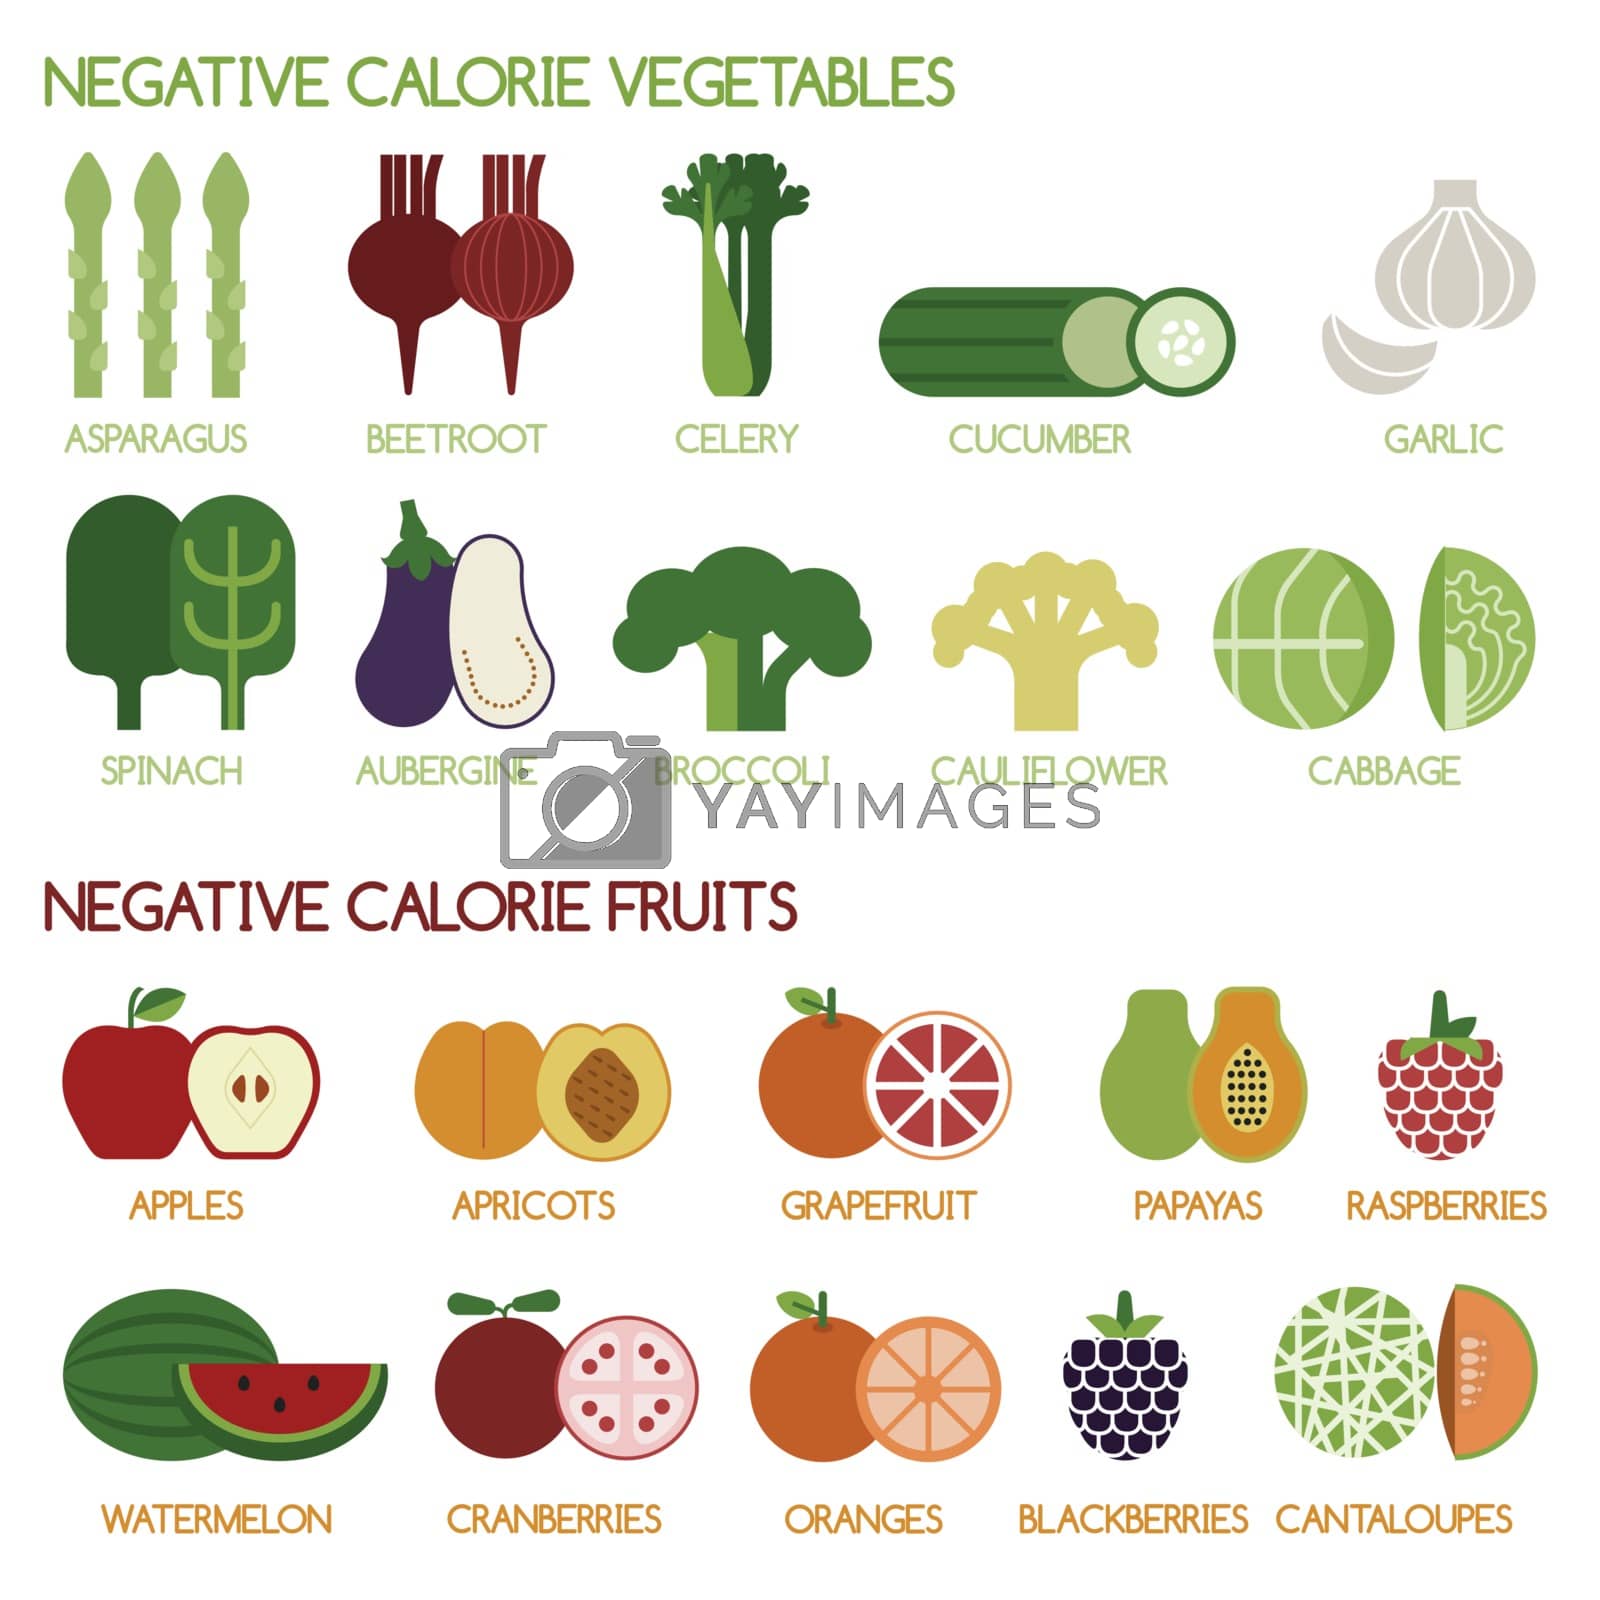 Royalty free image of Negative calorie vegetables and fruits by kninwong